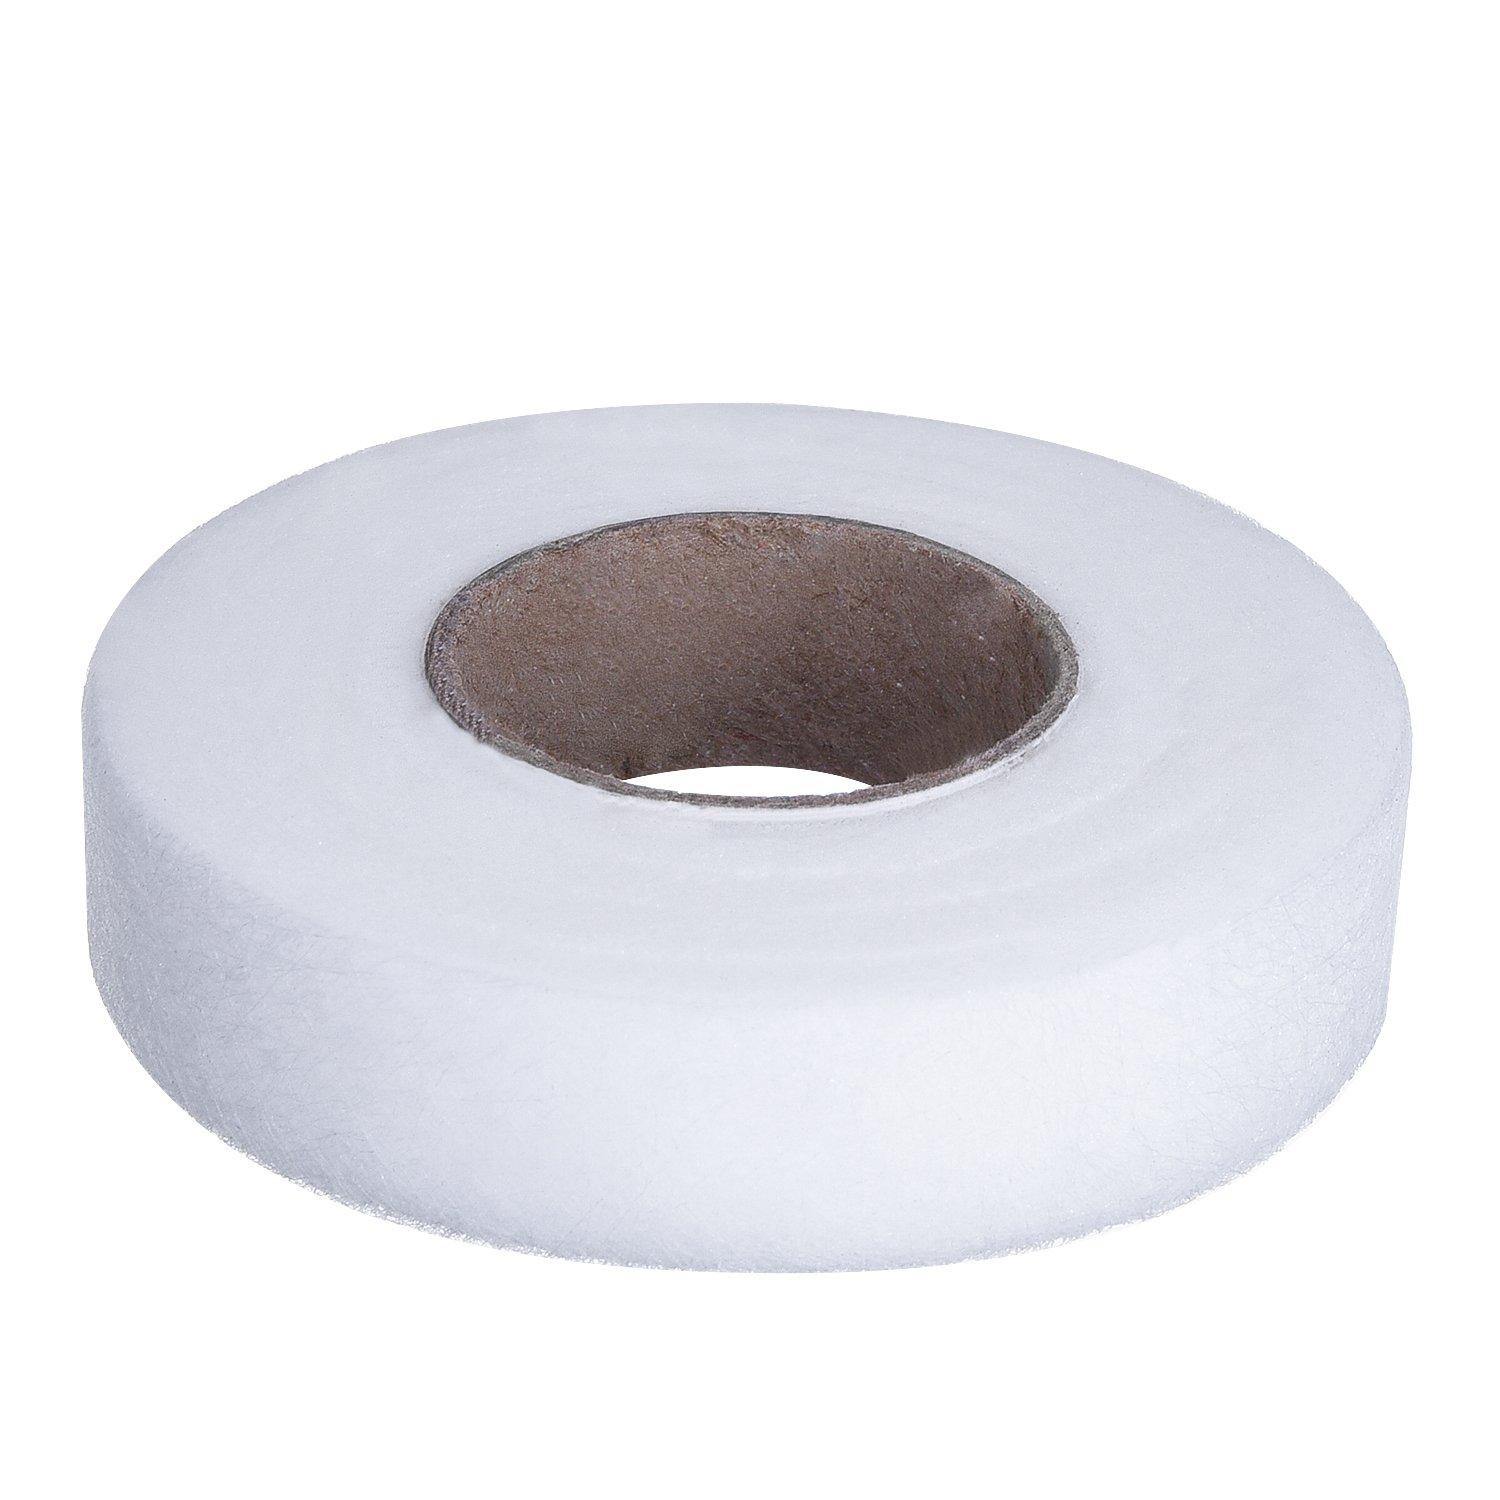 Outus Fabric Fusing Tape Adhesive Hem Tape Iron-On Tape Each 27 Yards 2 Pack (3/4 inch)